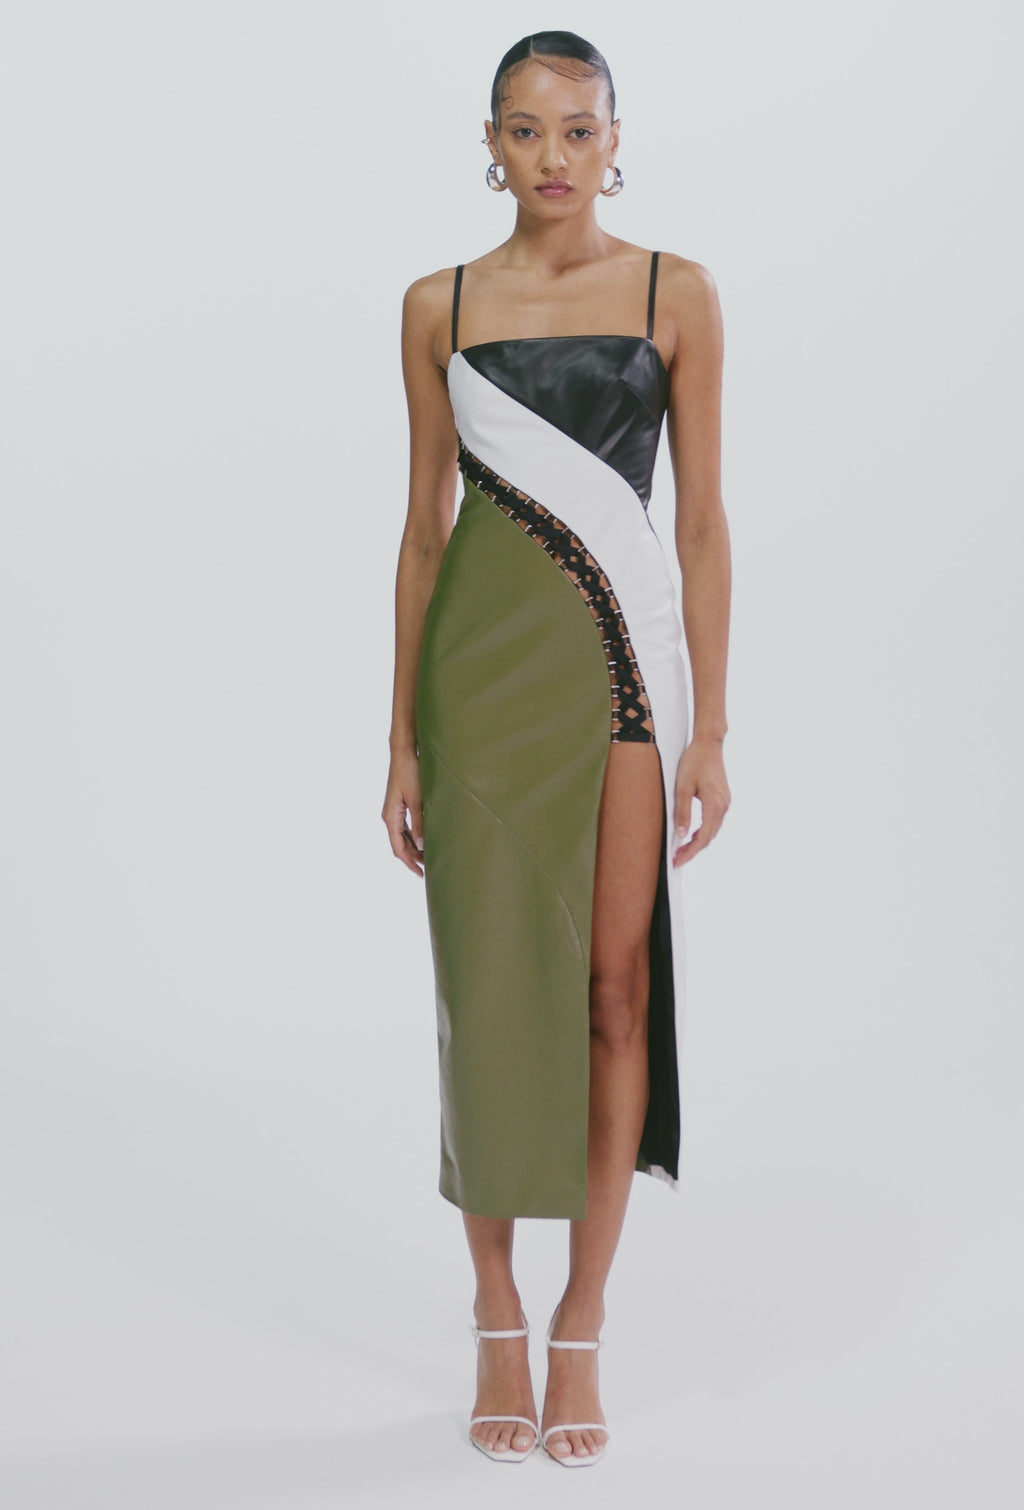 PRITCH ROGUE SLIT LACE UP MAXI DRESS PATCHED OLIVE